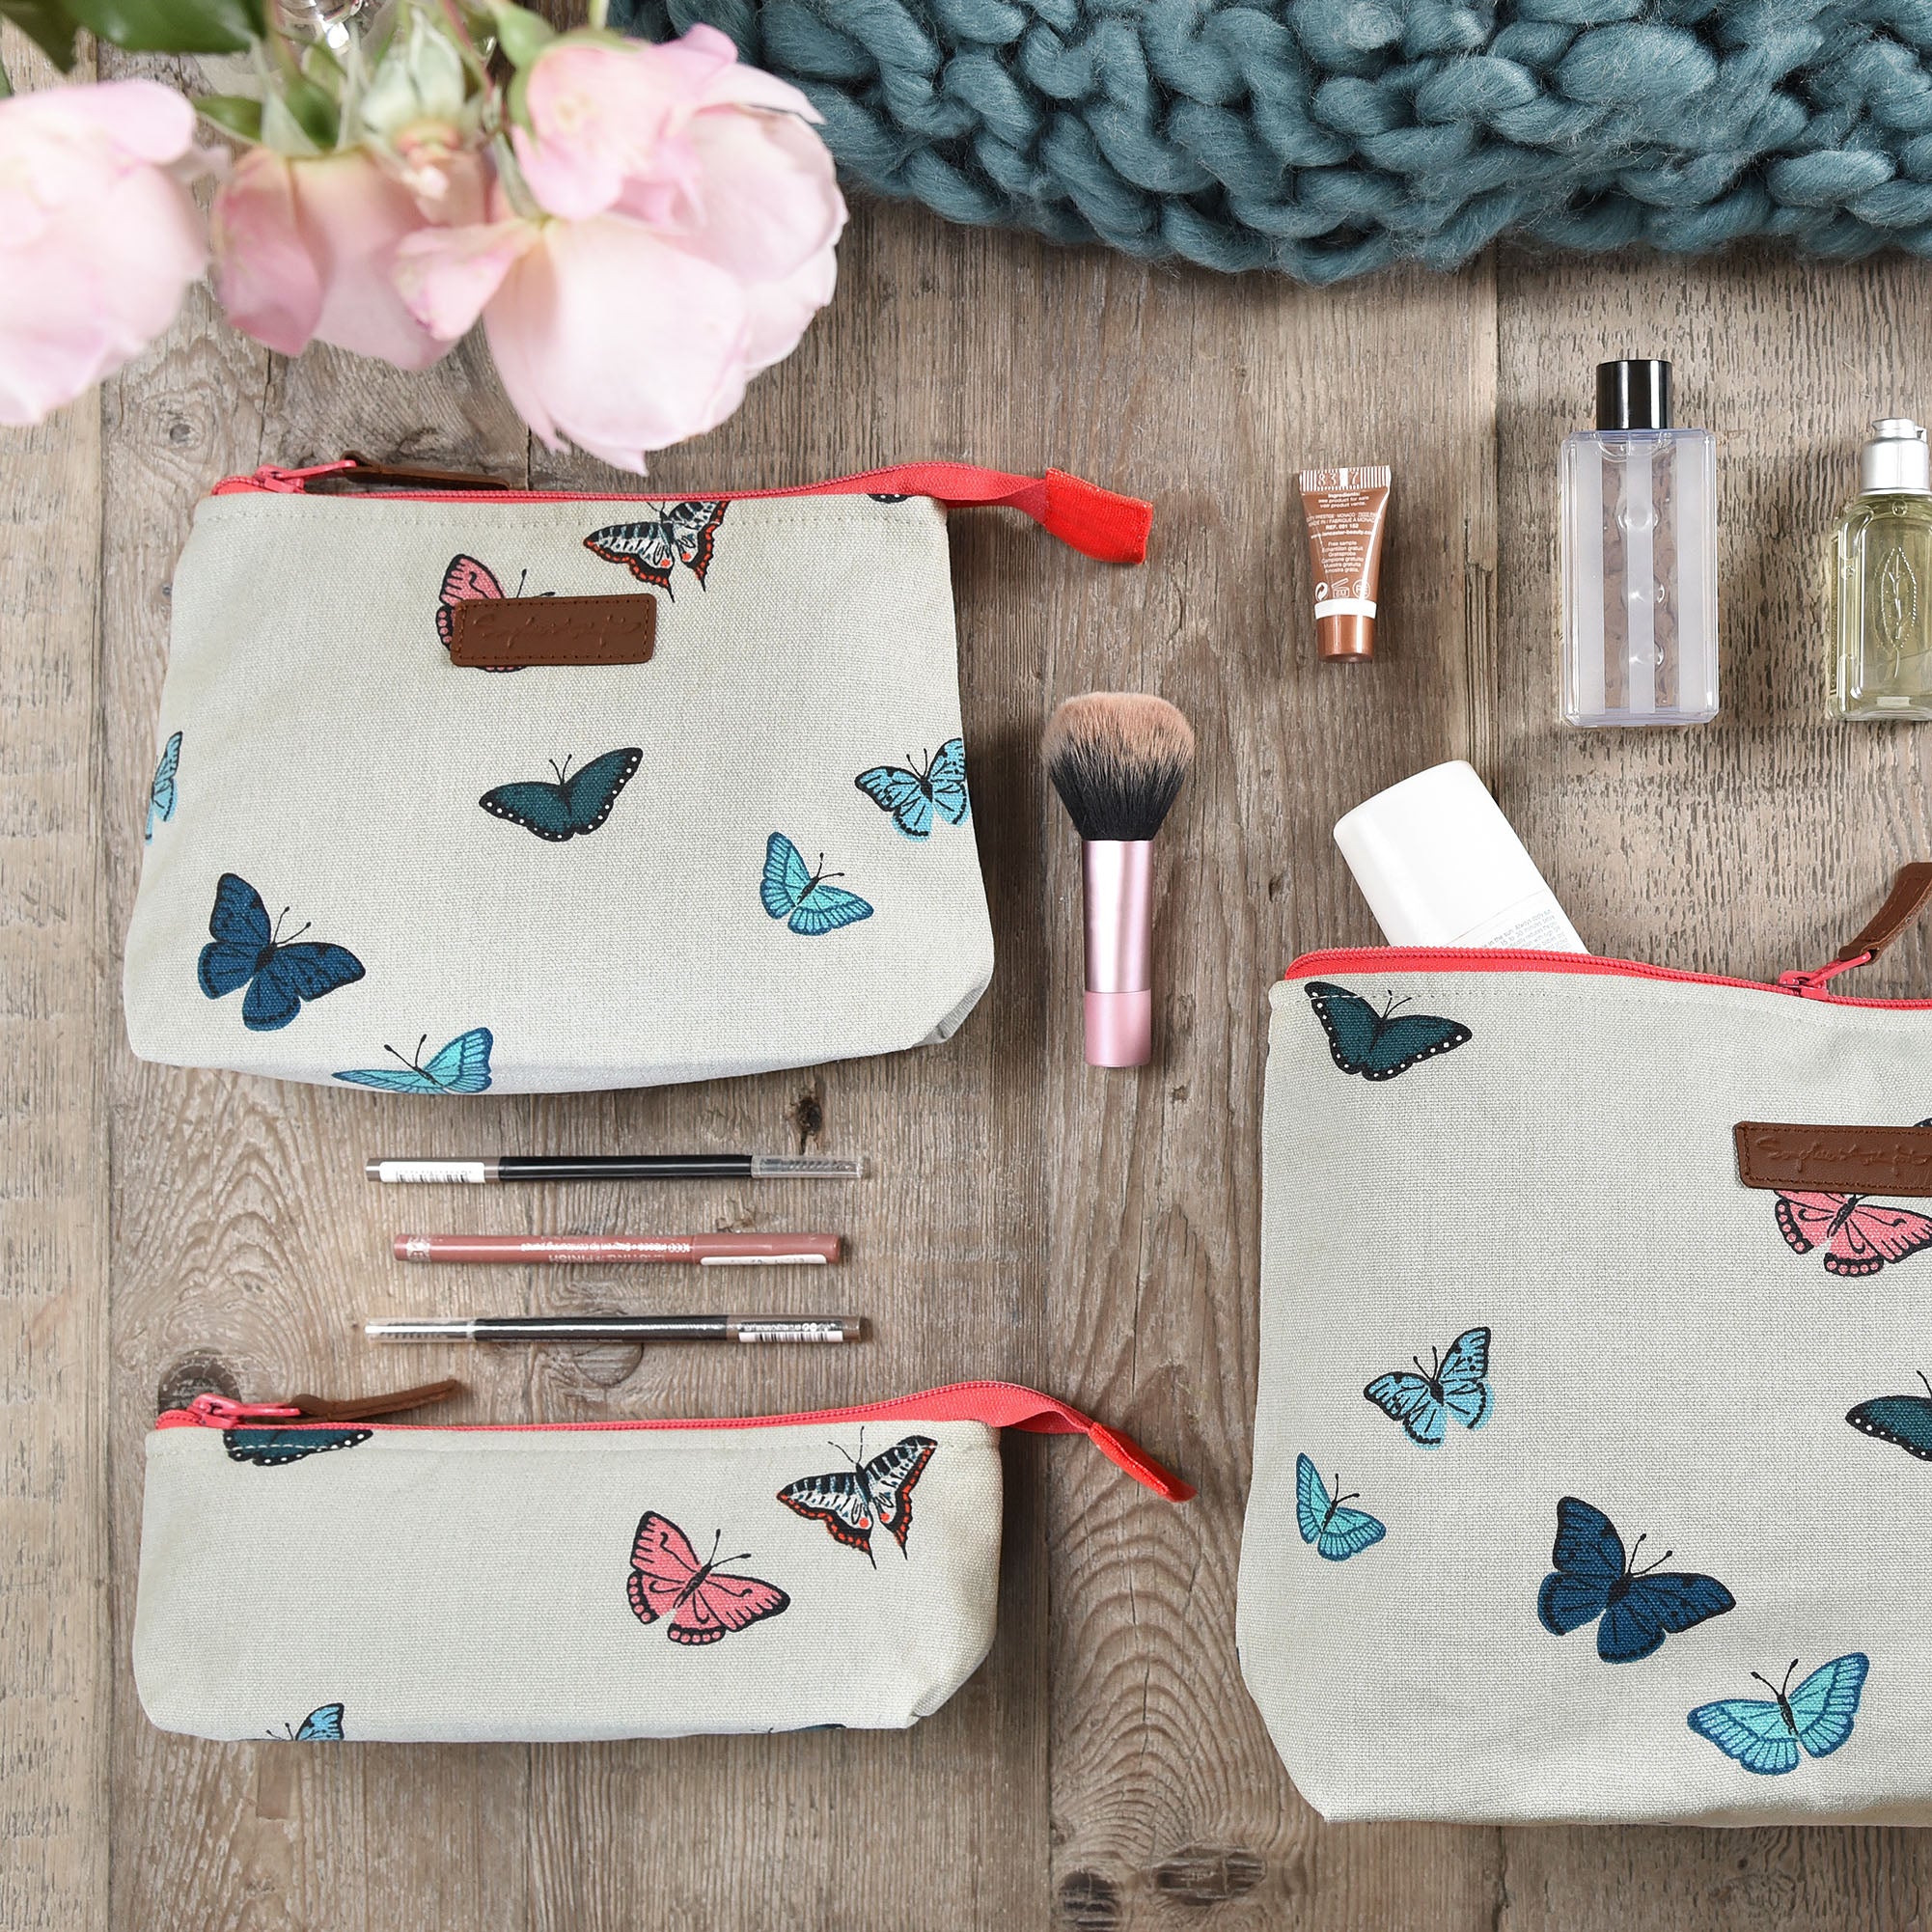 Makeup bag by Sophie Allport covered in colourful butterflies